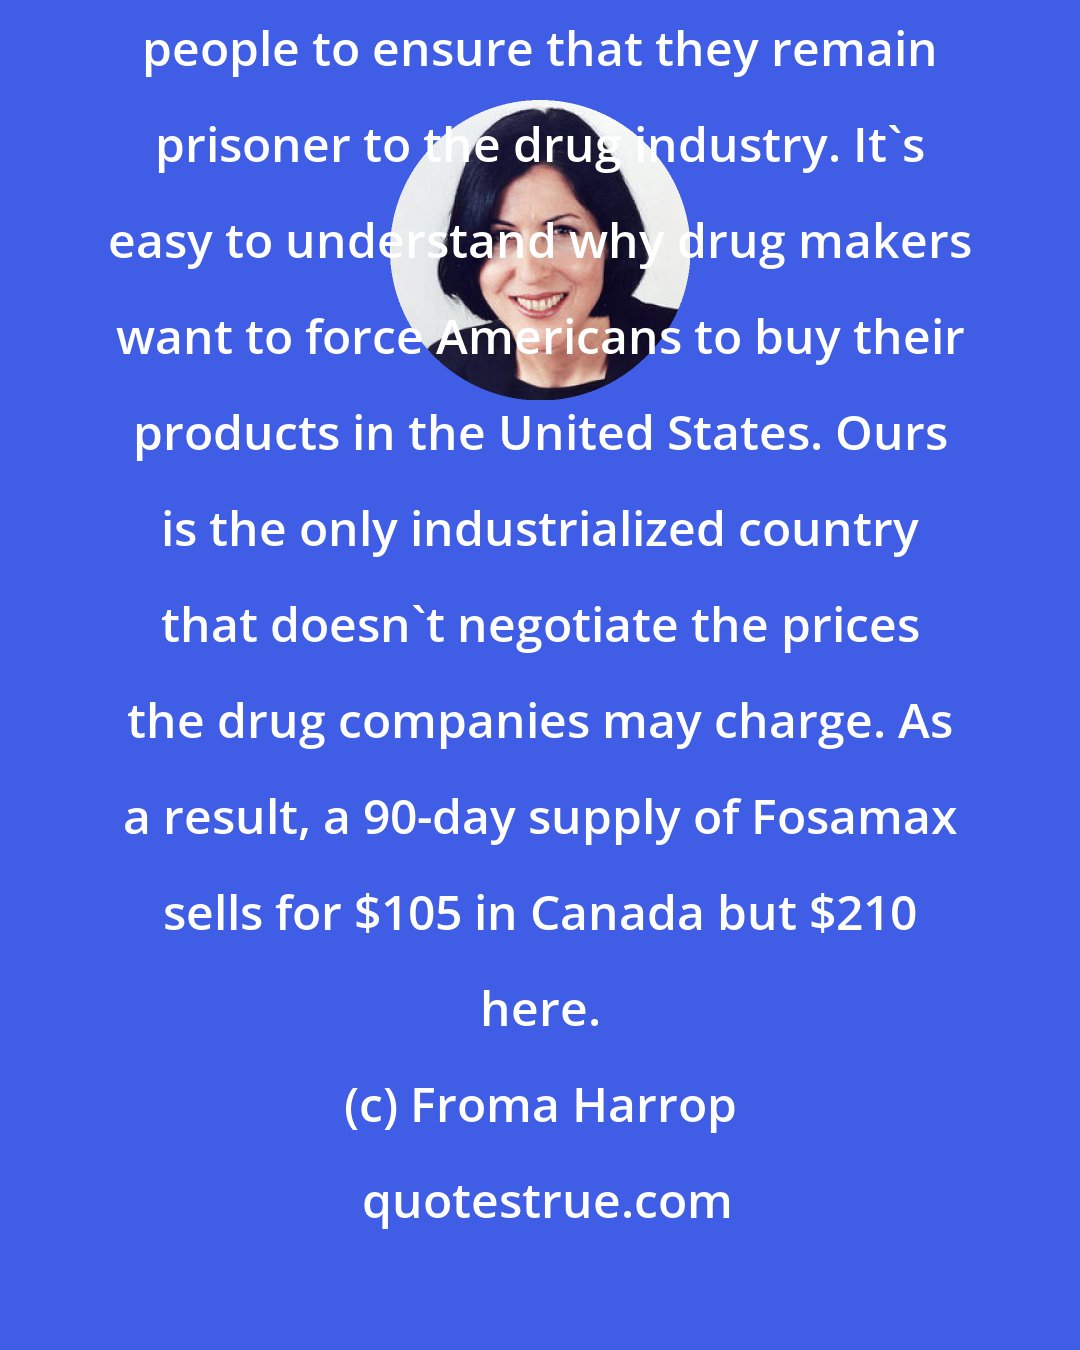 Froma Harrop: In case you haven't noticed, a large wall is being built around the American people to ensure that they remain prisoner to the drug industry. It's easy to understand why drug makers want to force Americans to buy their products in the United States. Ours is the only industrialized country that doesn't negotiate the prices the drug companies may charge. As a result, a 90-day supply of Fosamax sells for $105 in Canada but $210 here.